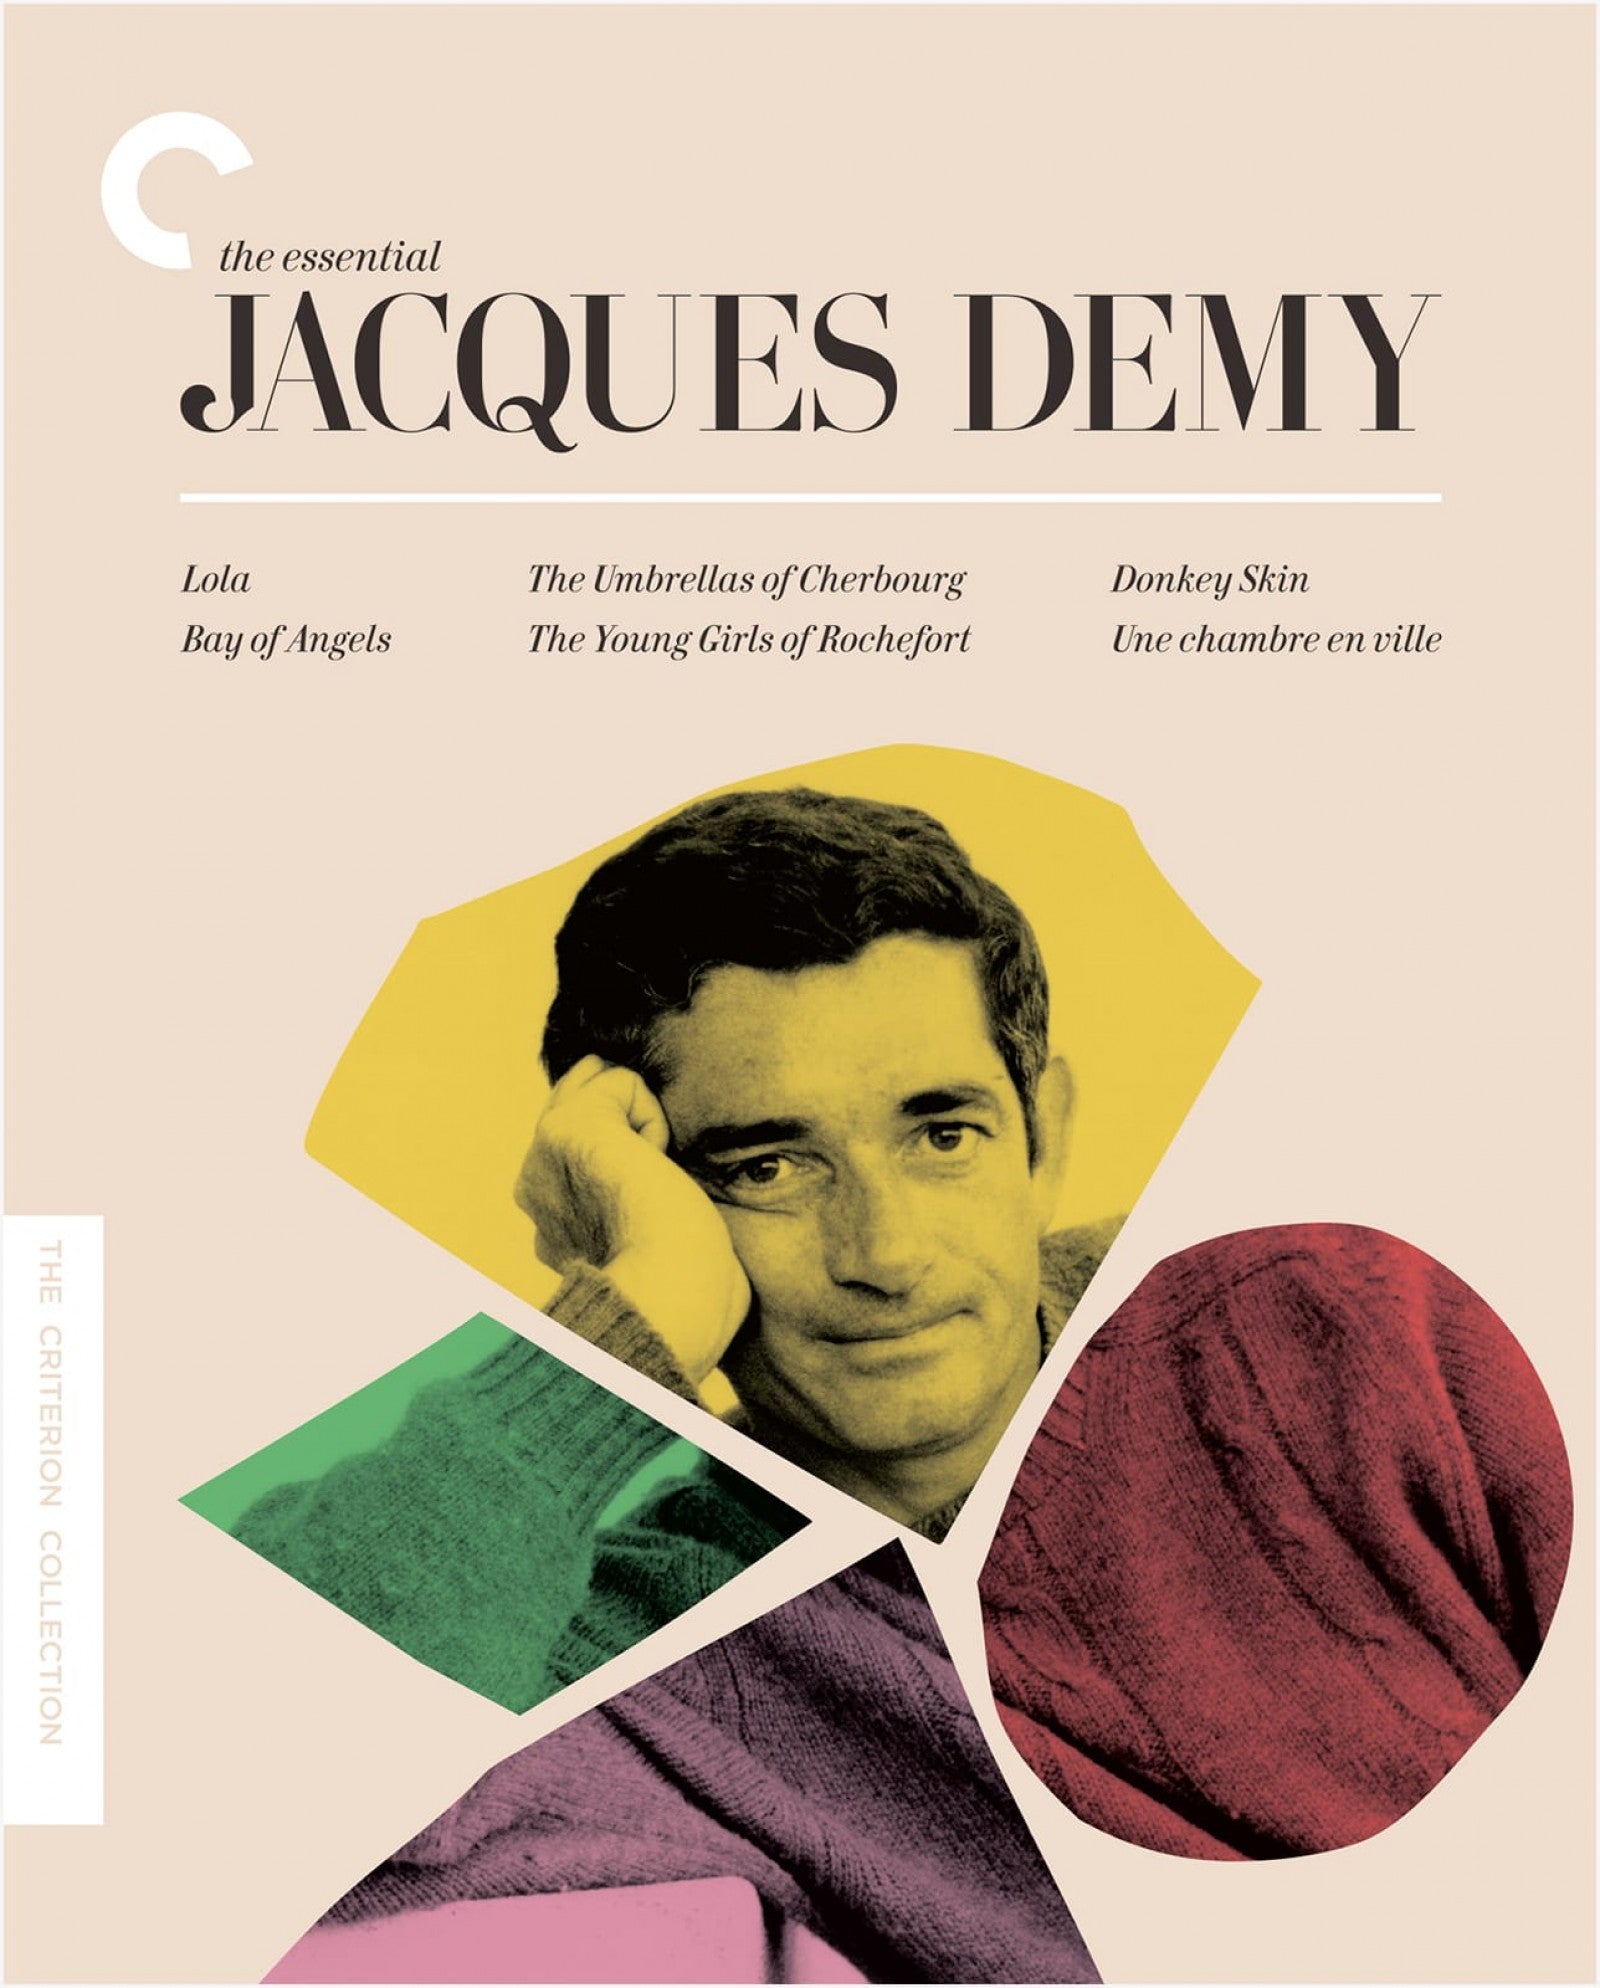 The Essential Jacques Demy